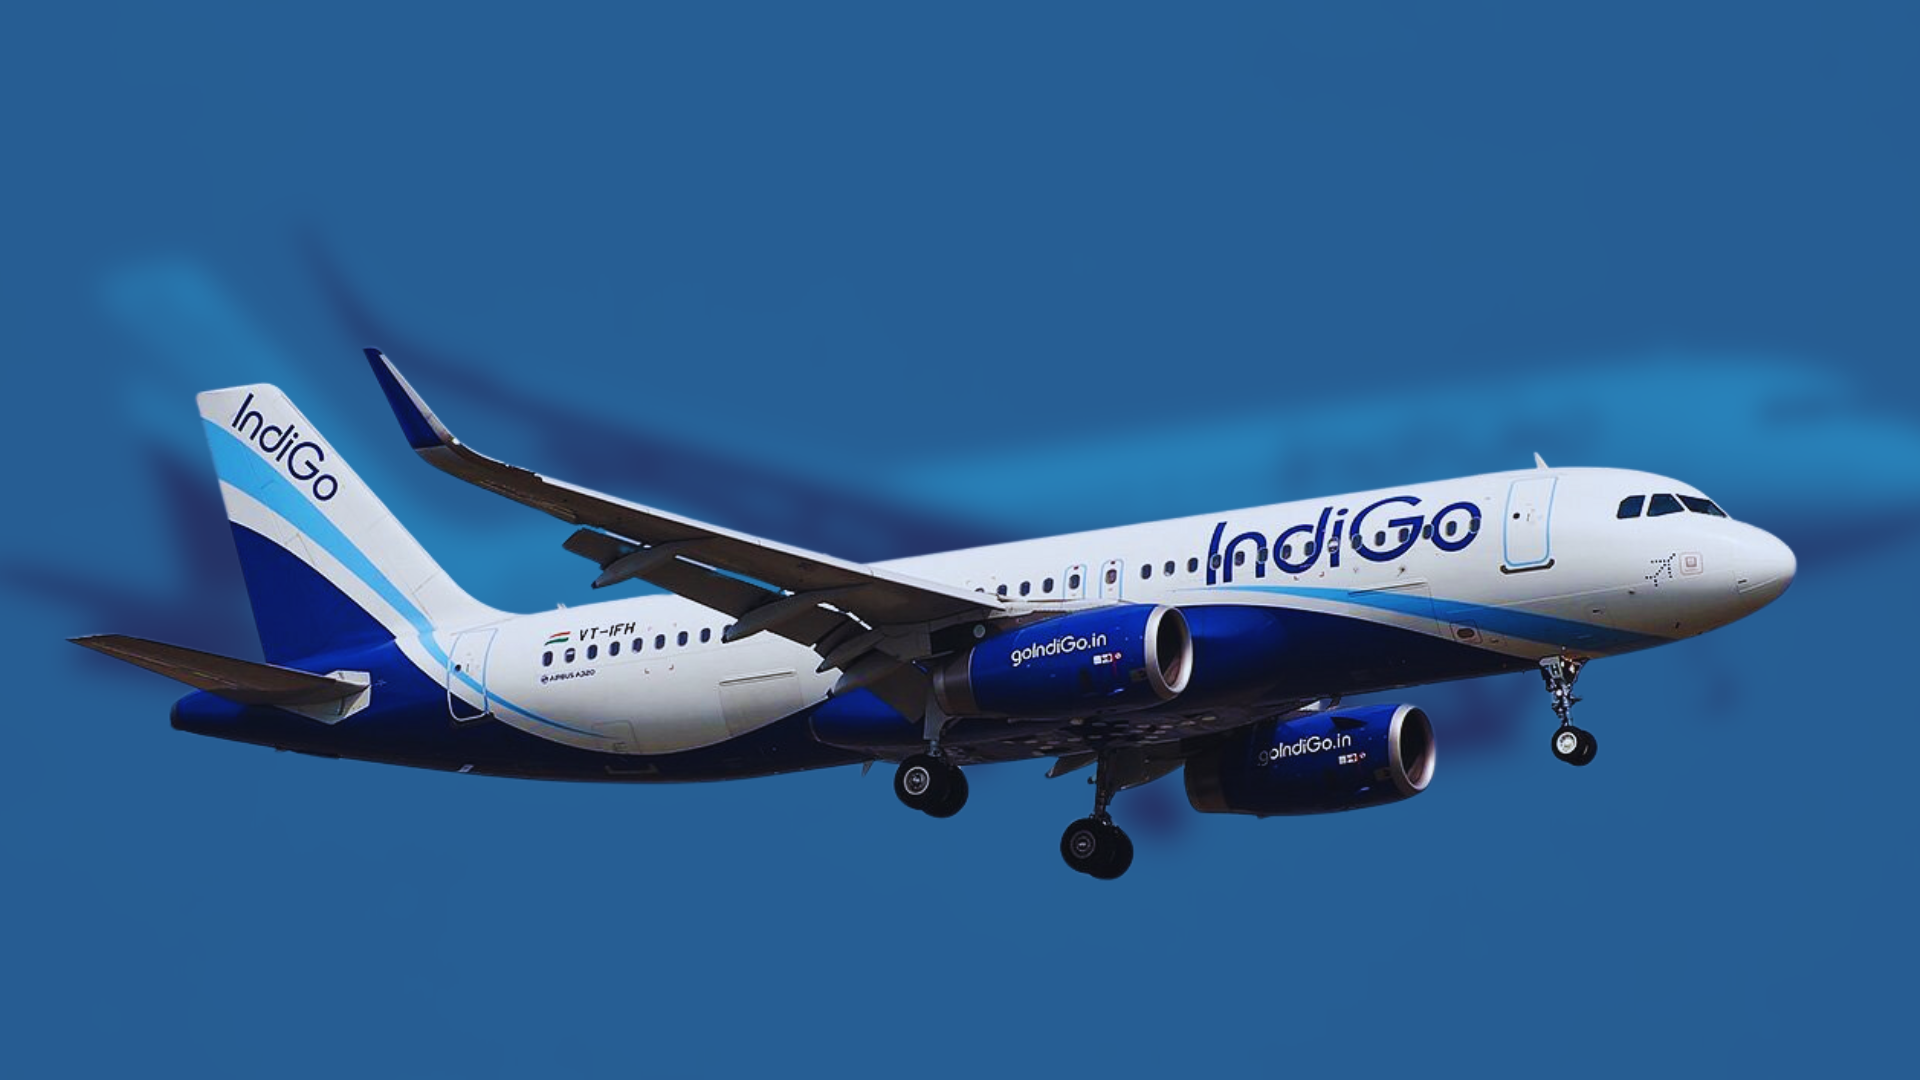 IndiGo Records Strong Profits, Unveils Customized Business Class For India’s Top Routes